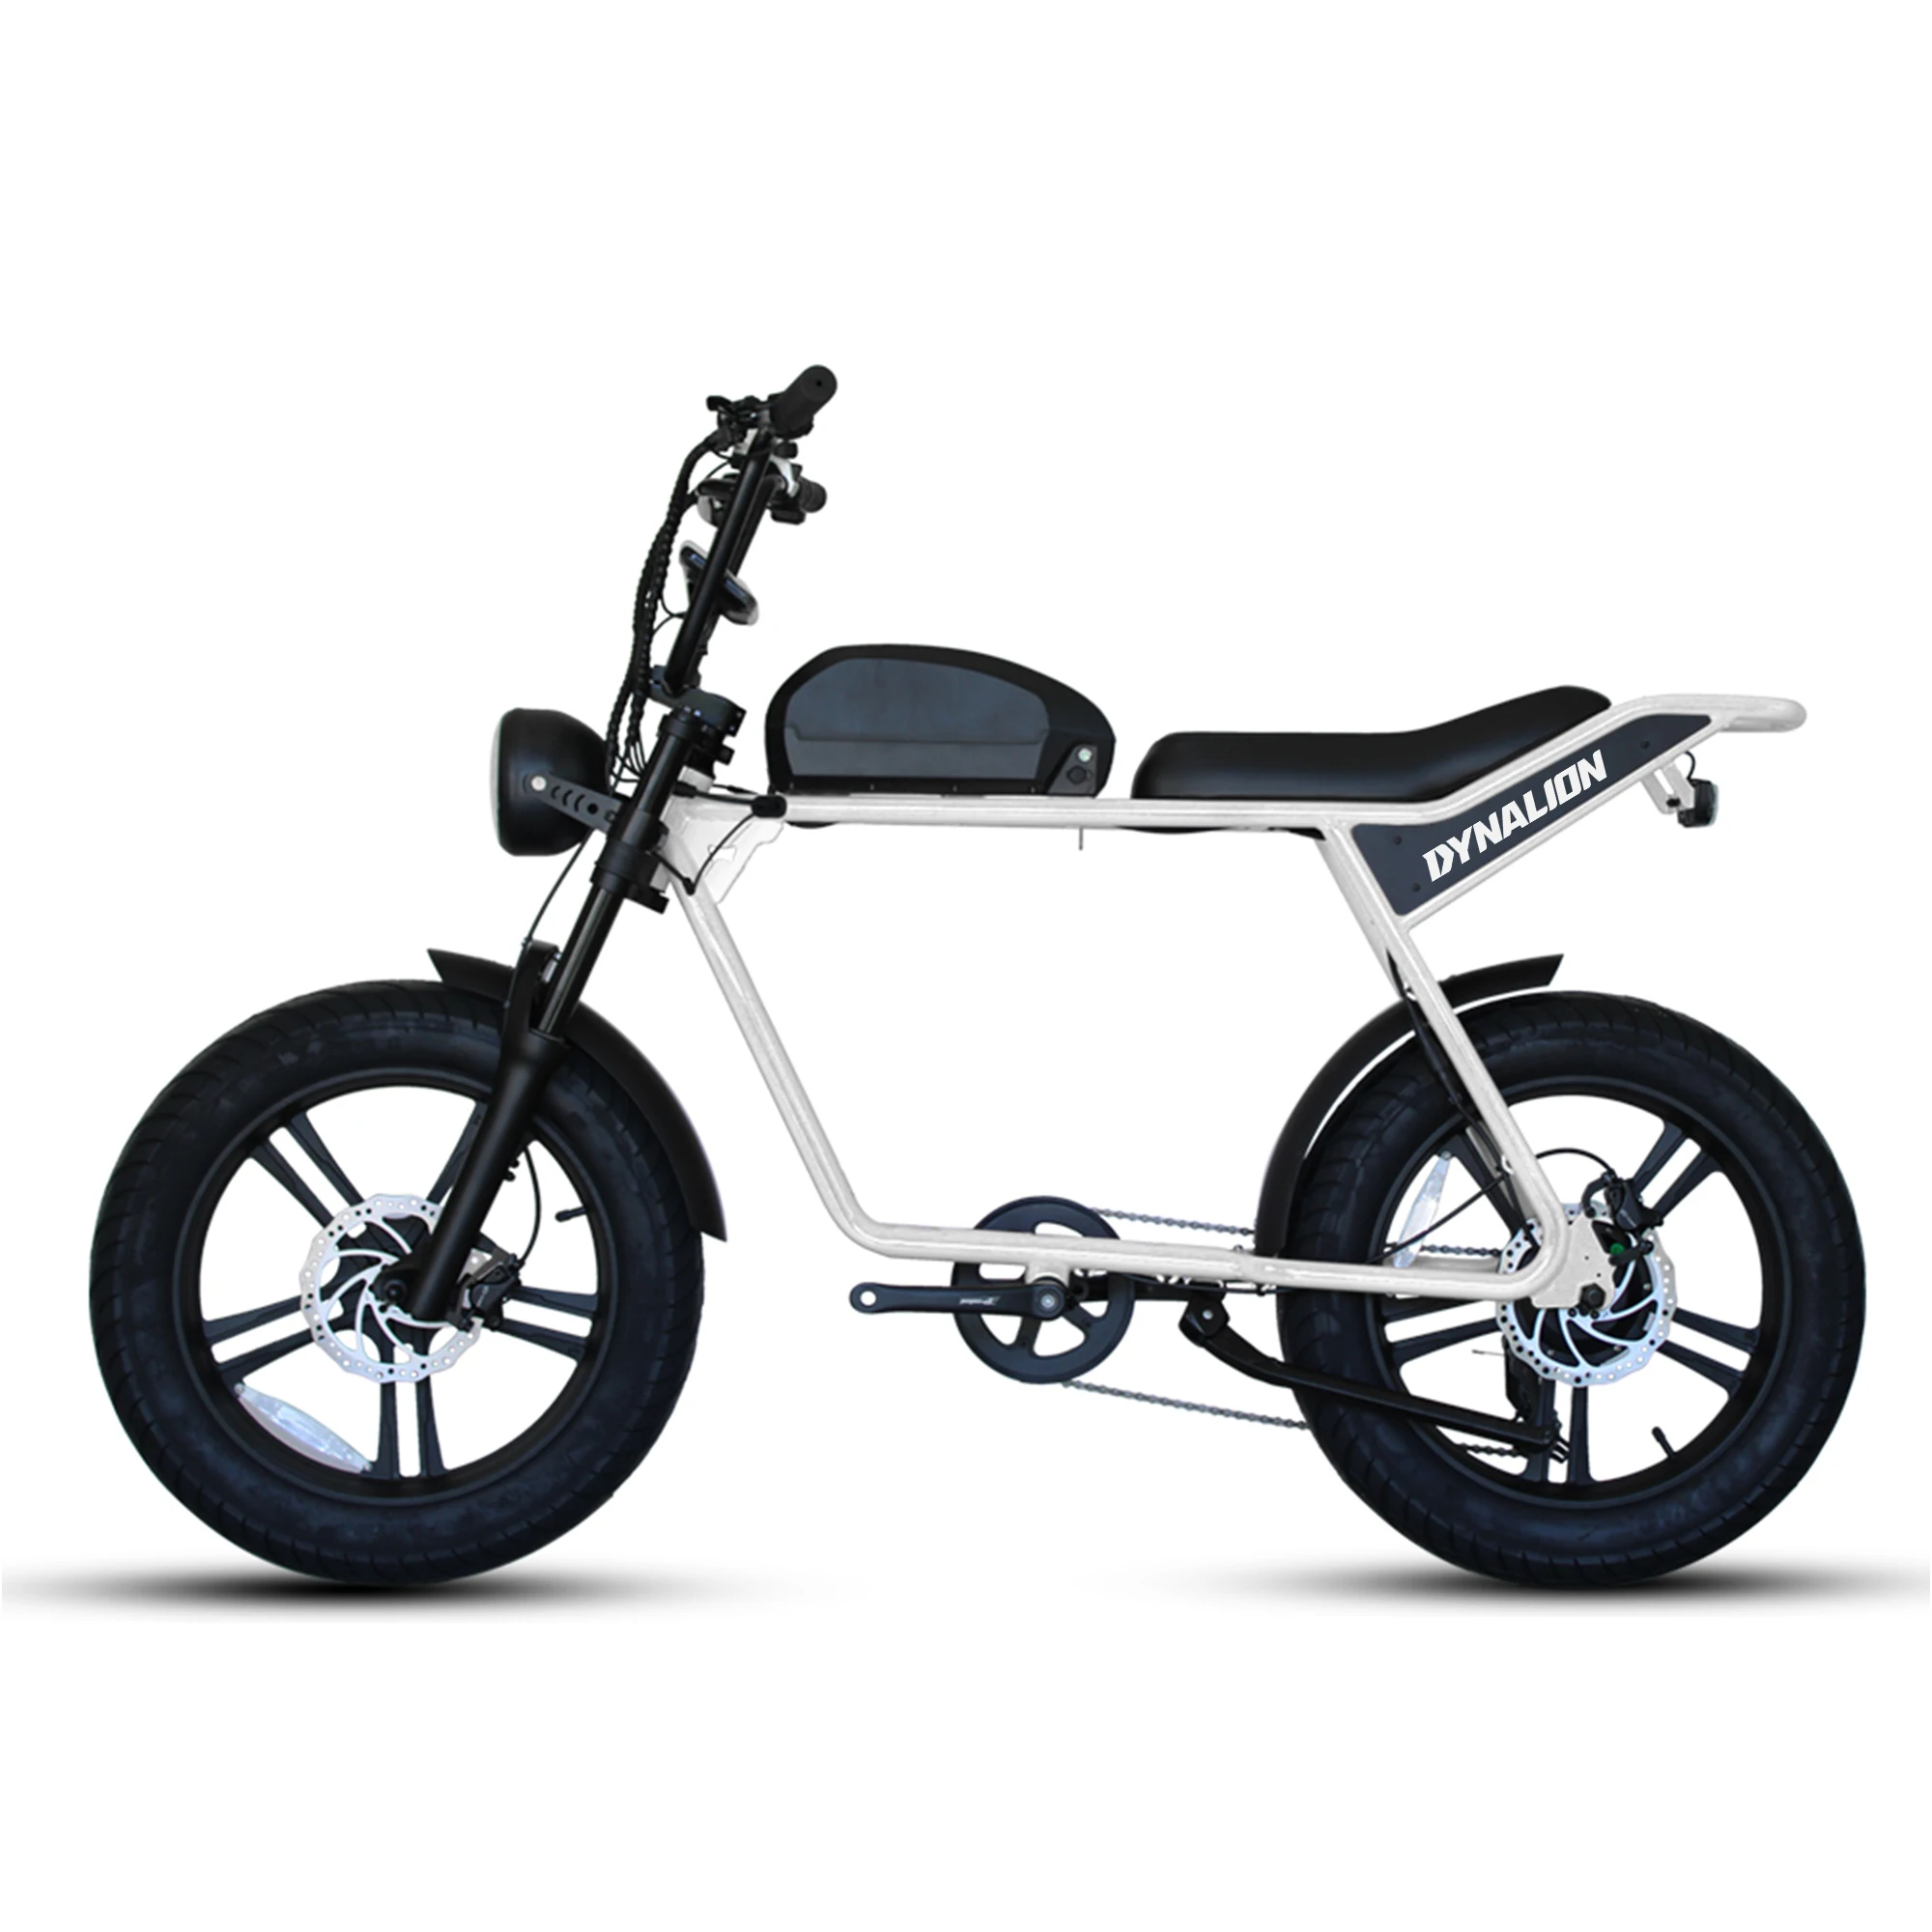 

DYNALION 48V 750W Fat Tire Dirt Adult Moped Bicicleta Electrica 1000w Full Suspension Electric Bike E Bike Motorcycle